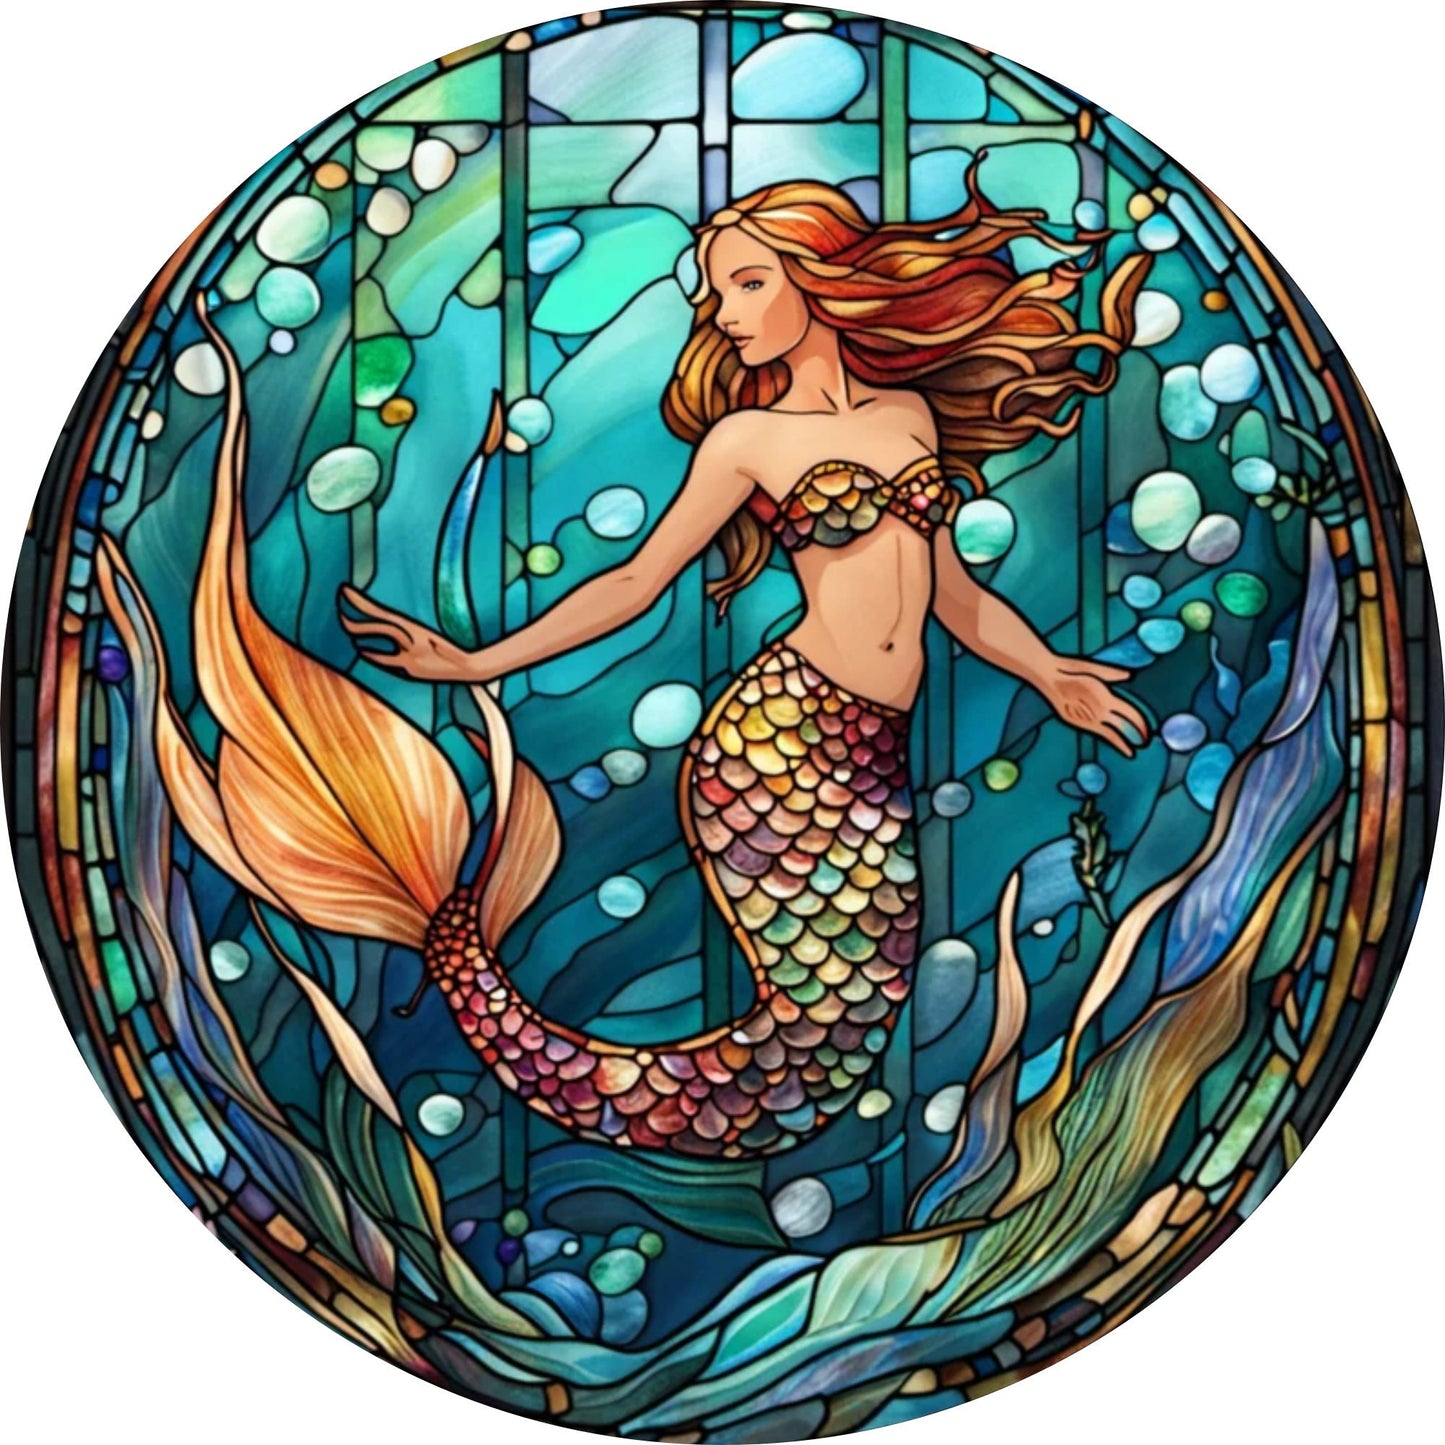 Mermaid, Nautical, Stained Glass Inspired, Metal Wreath Sign, Sublimation Sign, Home Decor (Round)